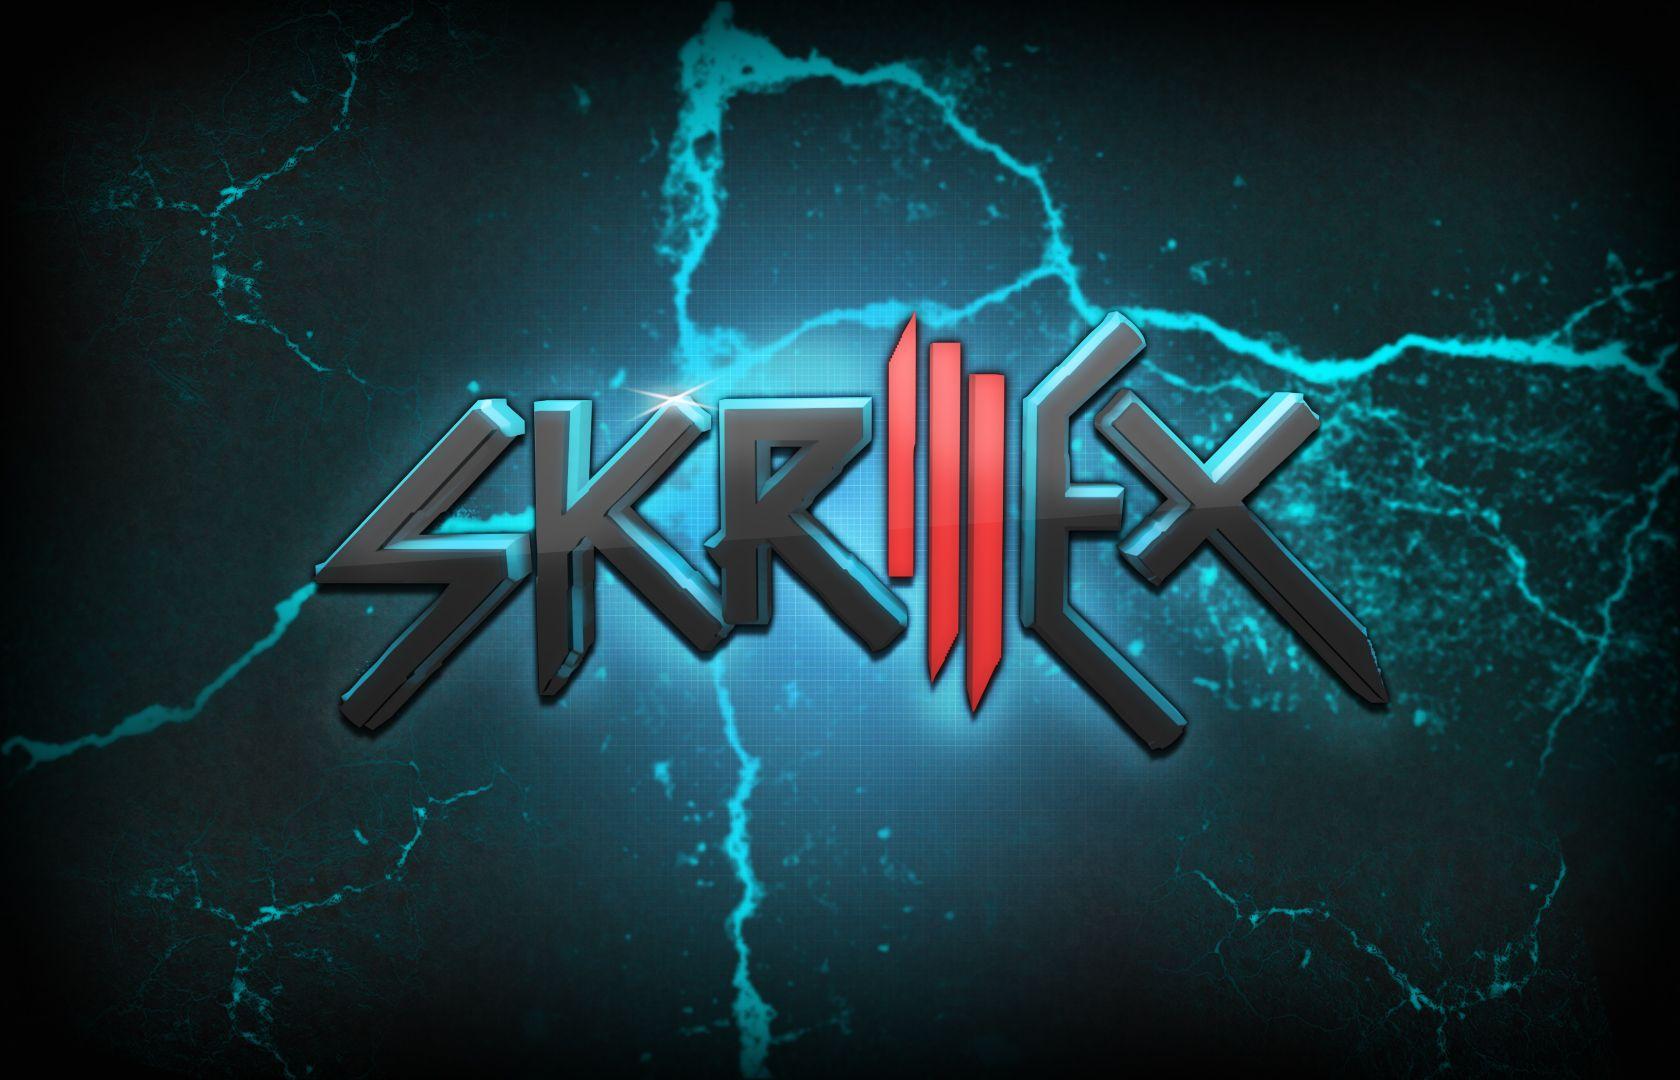 Awesome Skrillex Wallpapers - Top Free Awesome Skrillex Backgrounds ...